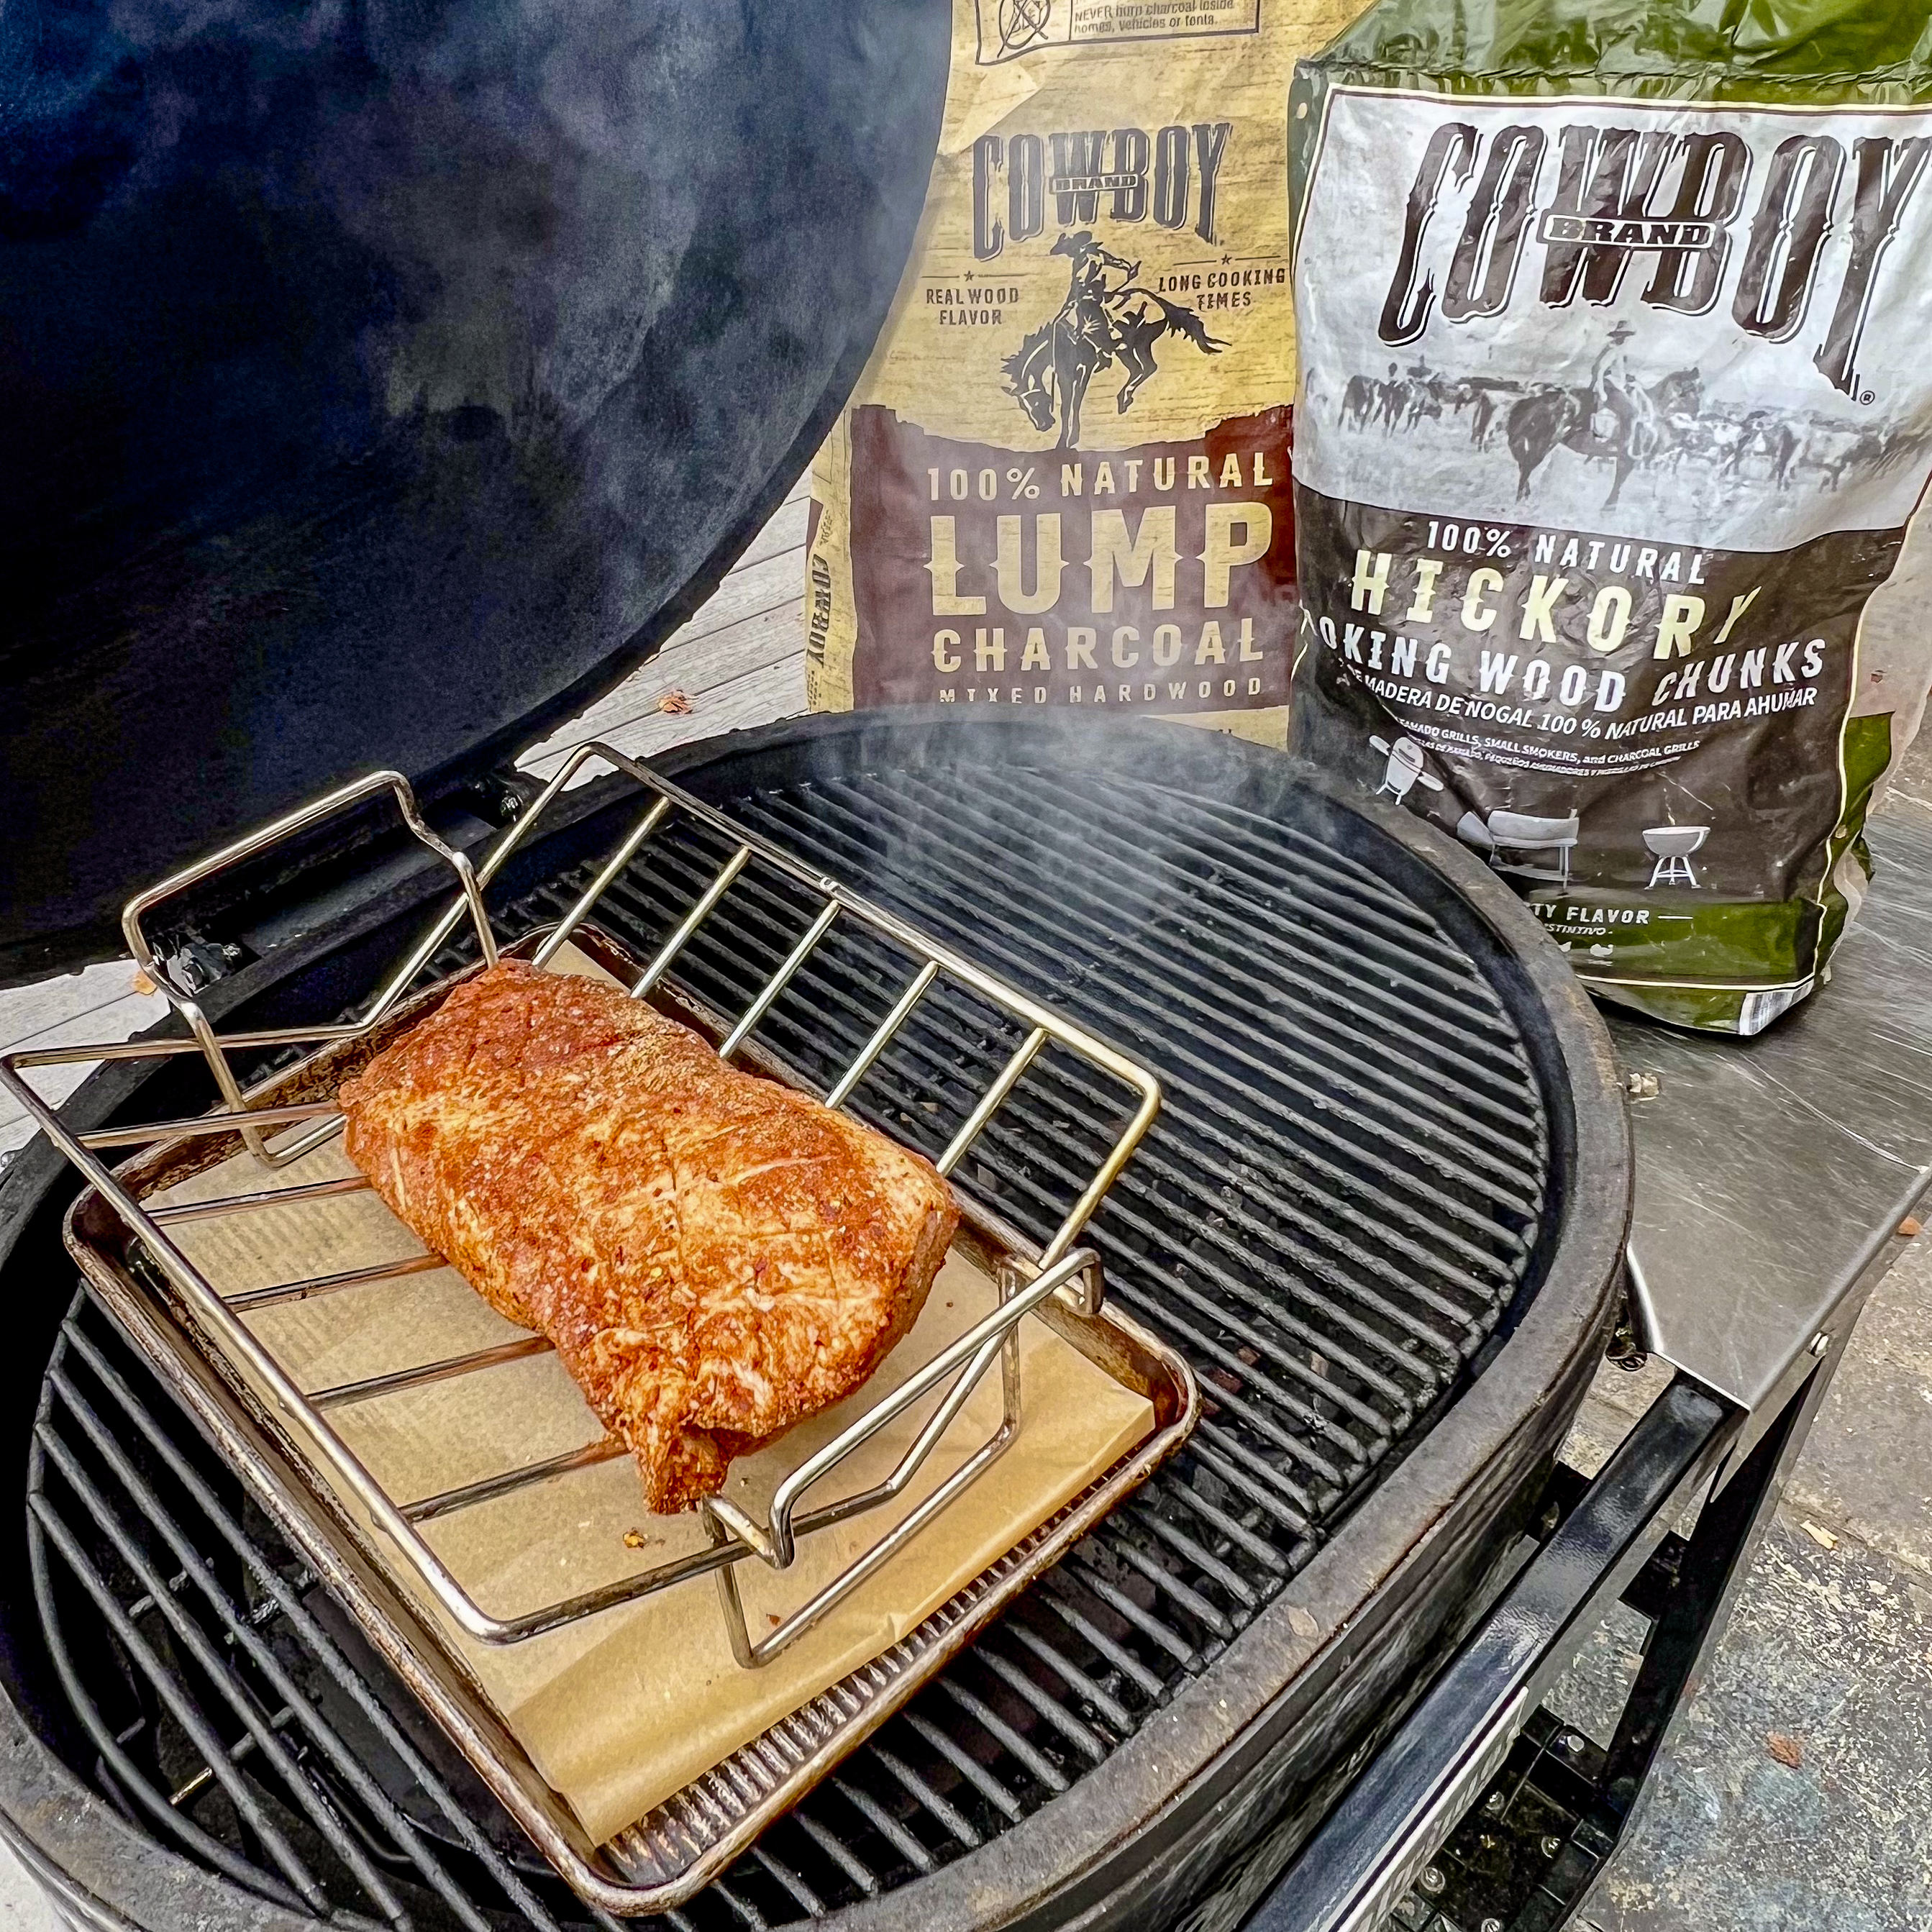 A seasoned pork loin is in a V-rack on the grill ready to smoke. A bag of Cowboy Lump Charcoal and a bag of Hickory Smoking Wood Chunks  is in the back. 